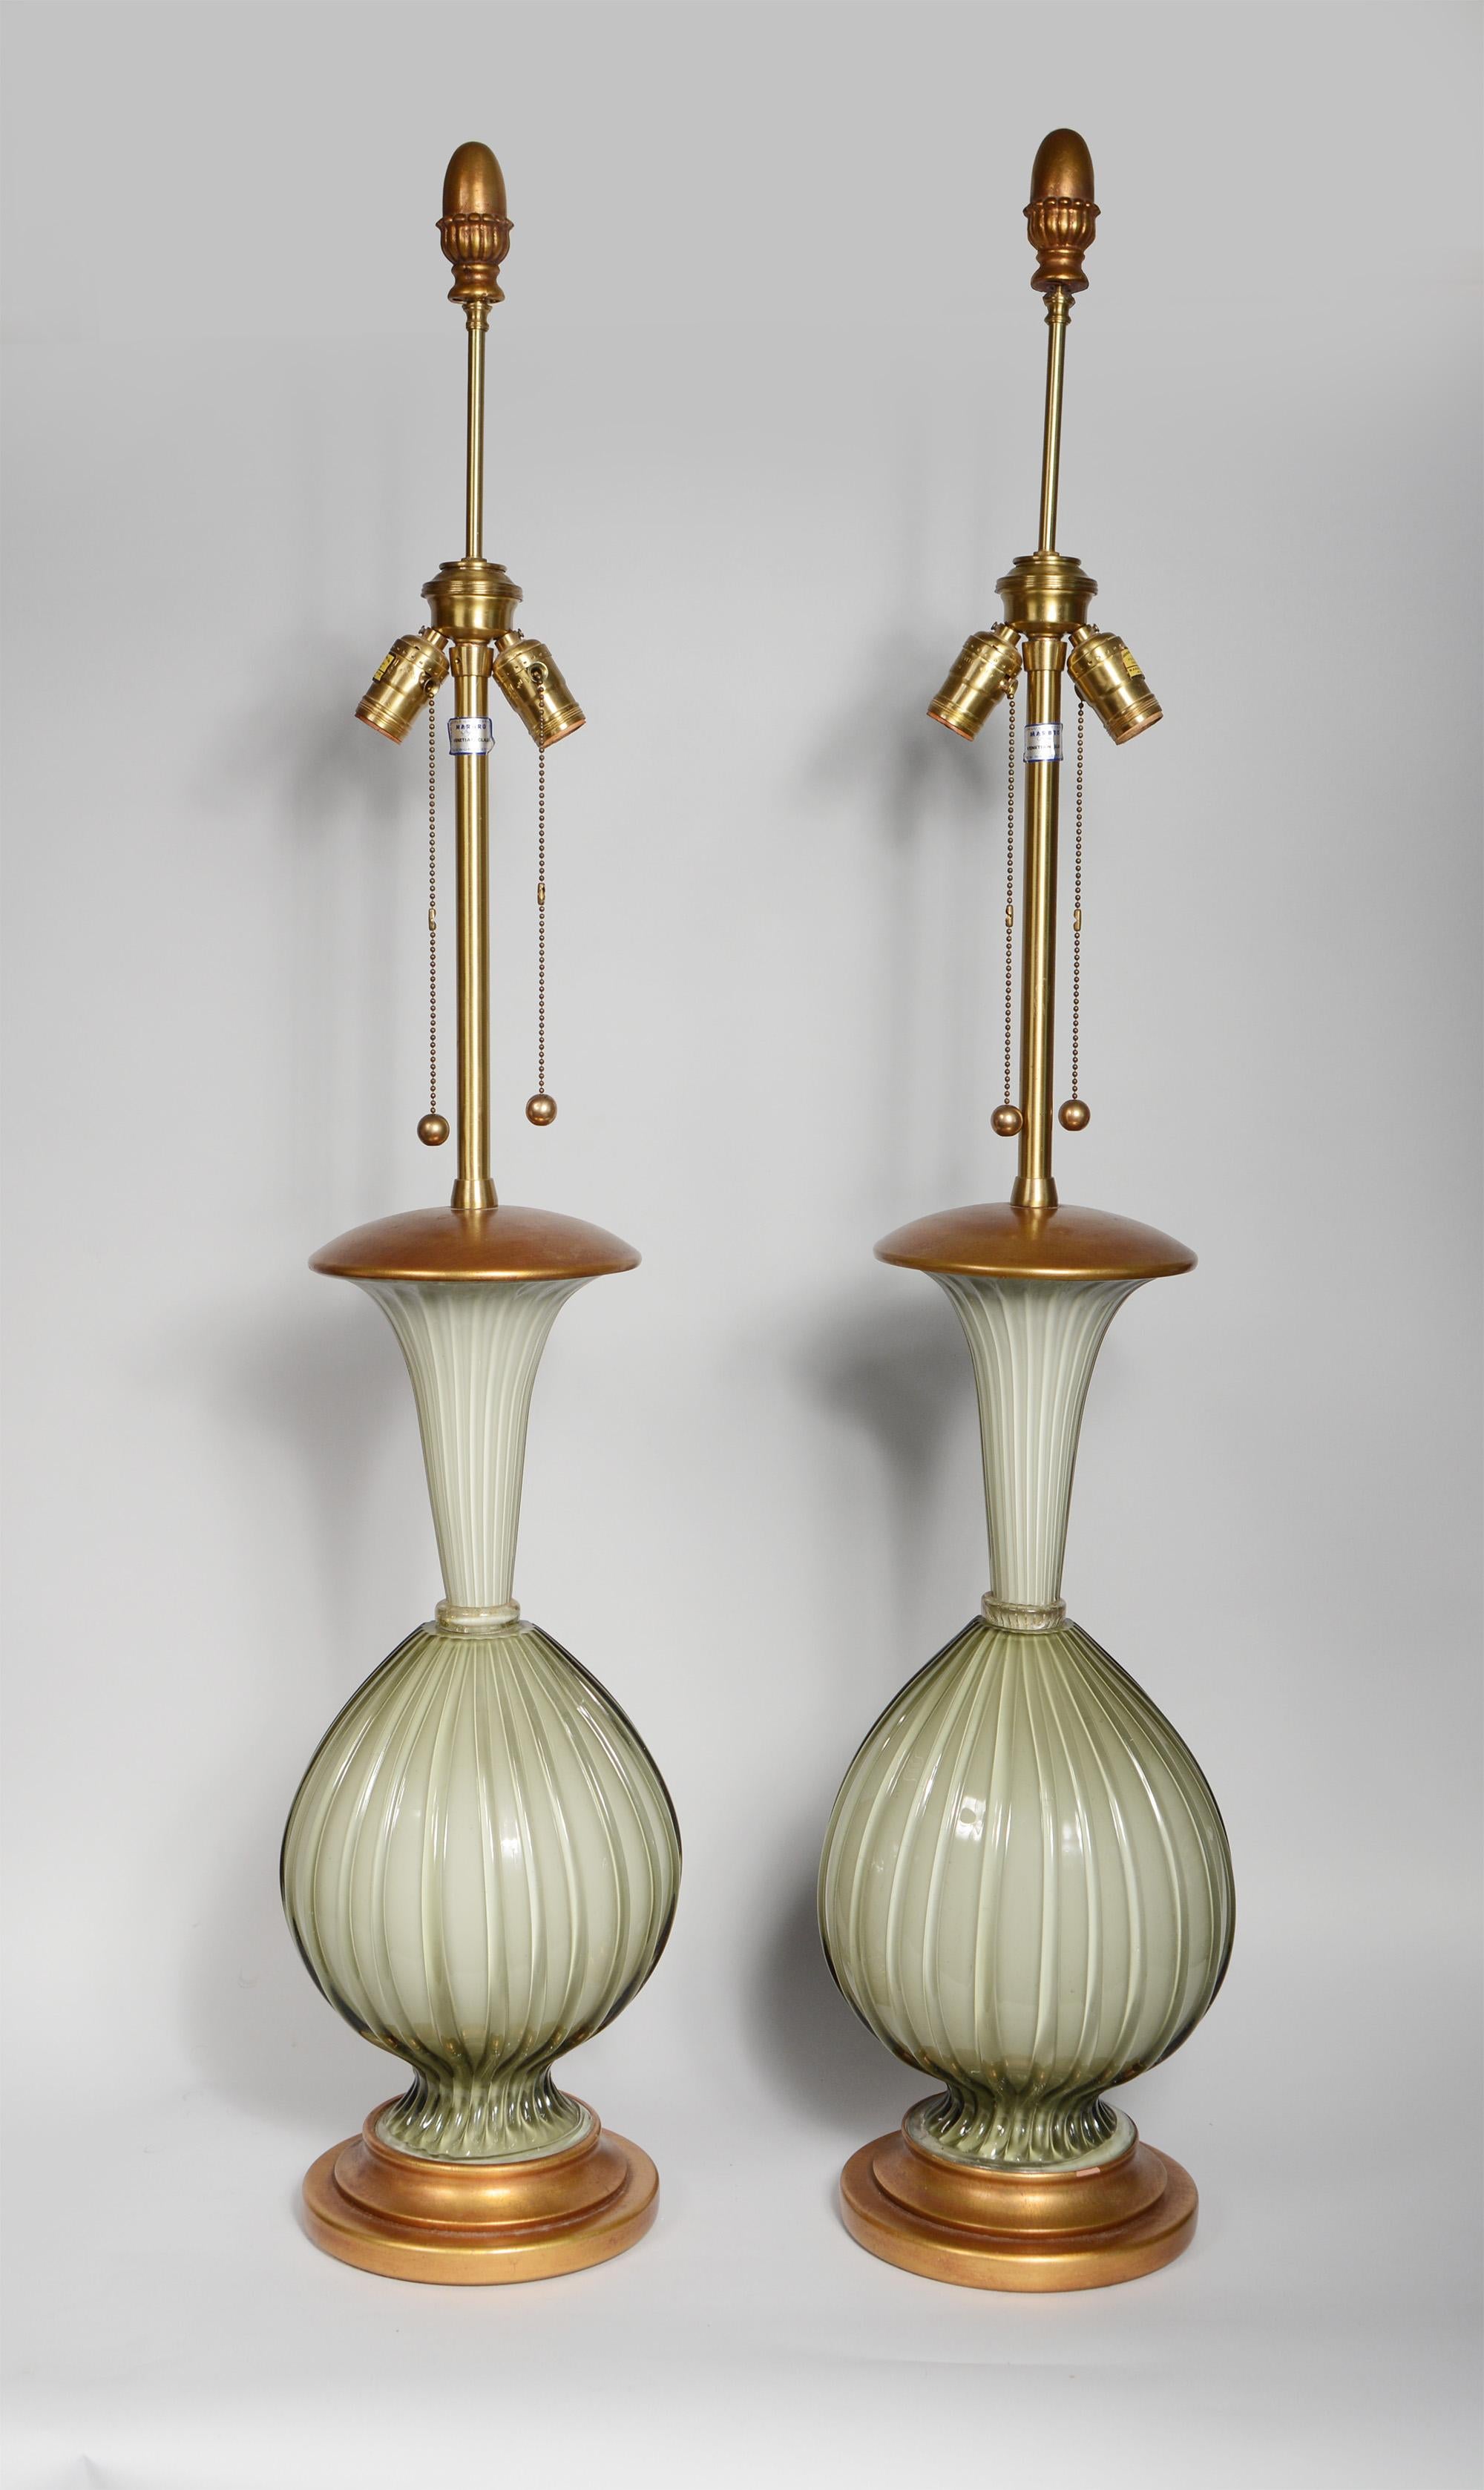 Pair of tall Venetian glass table lamps by Marbro Lamp Company. These have a warm grey ribbed glass cased over white. They have gilt wood bases and caps. The gilt finials are original. There is a small loss of paint on the base of one.